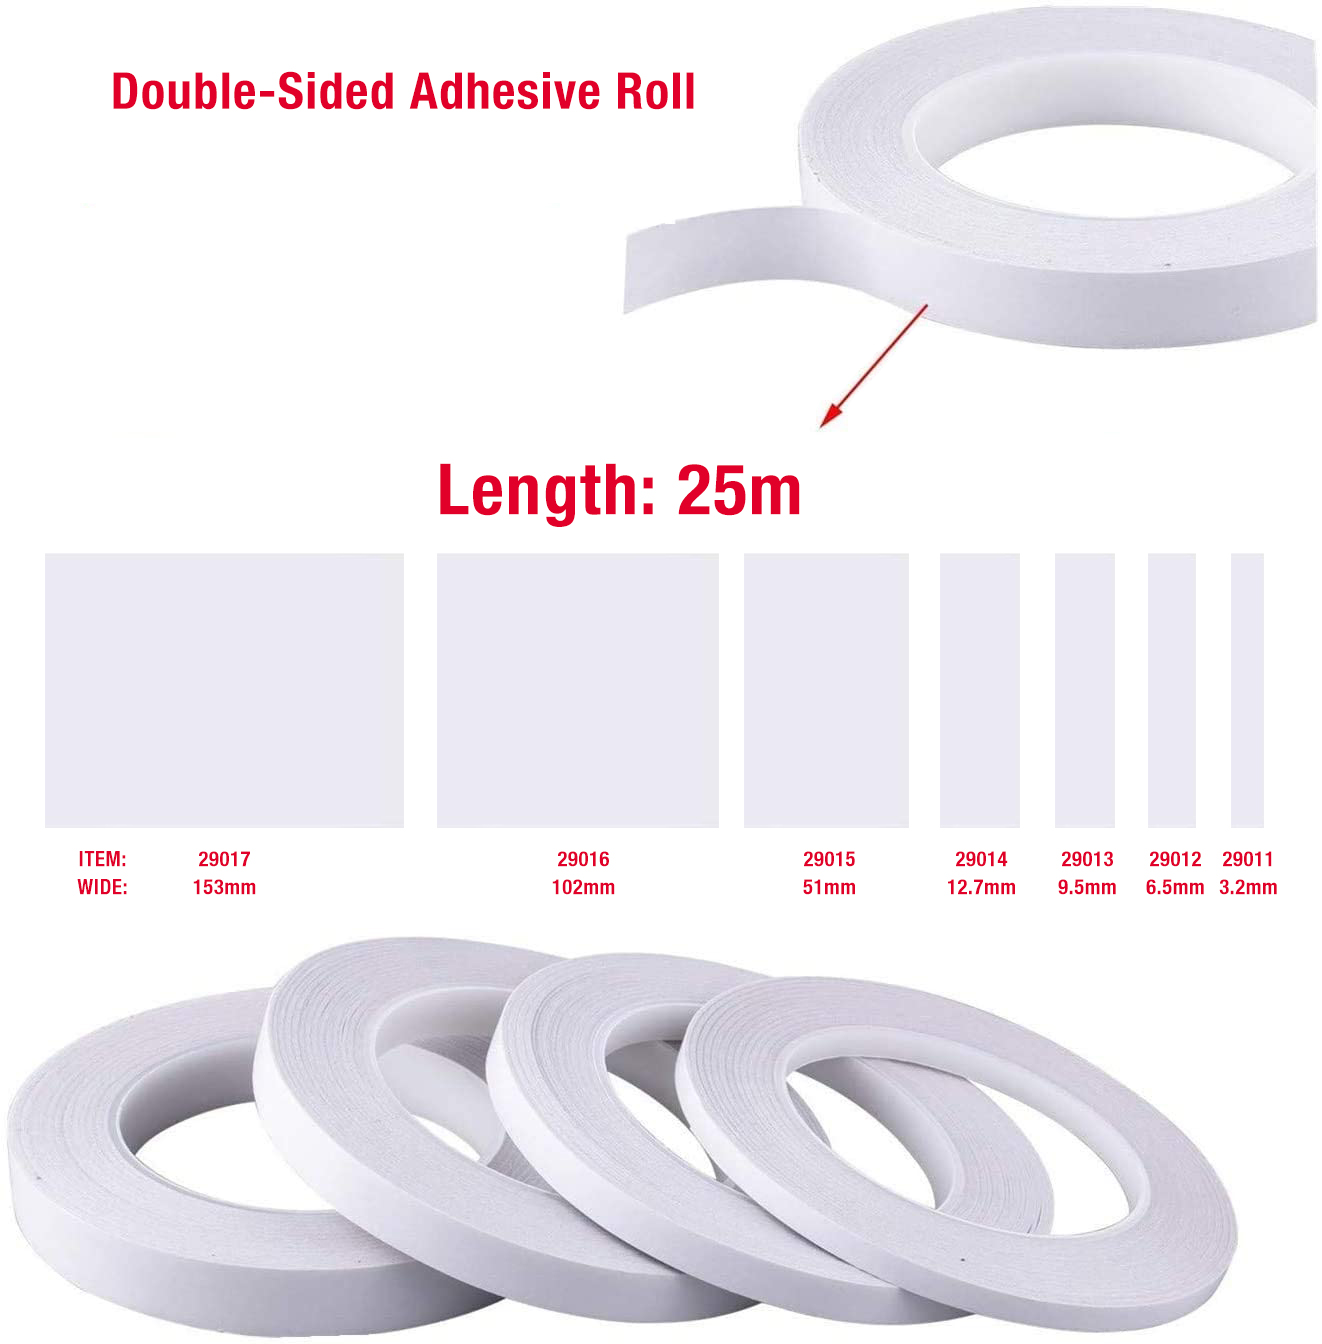 29011-29017 Double-Sided Adhesive Roll